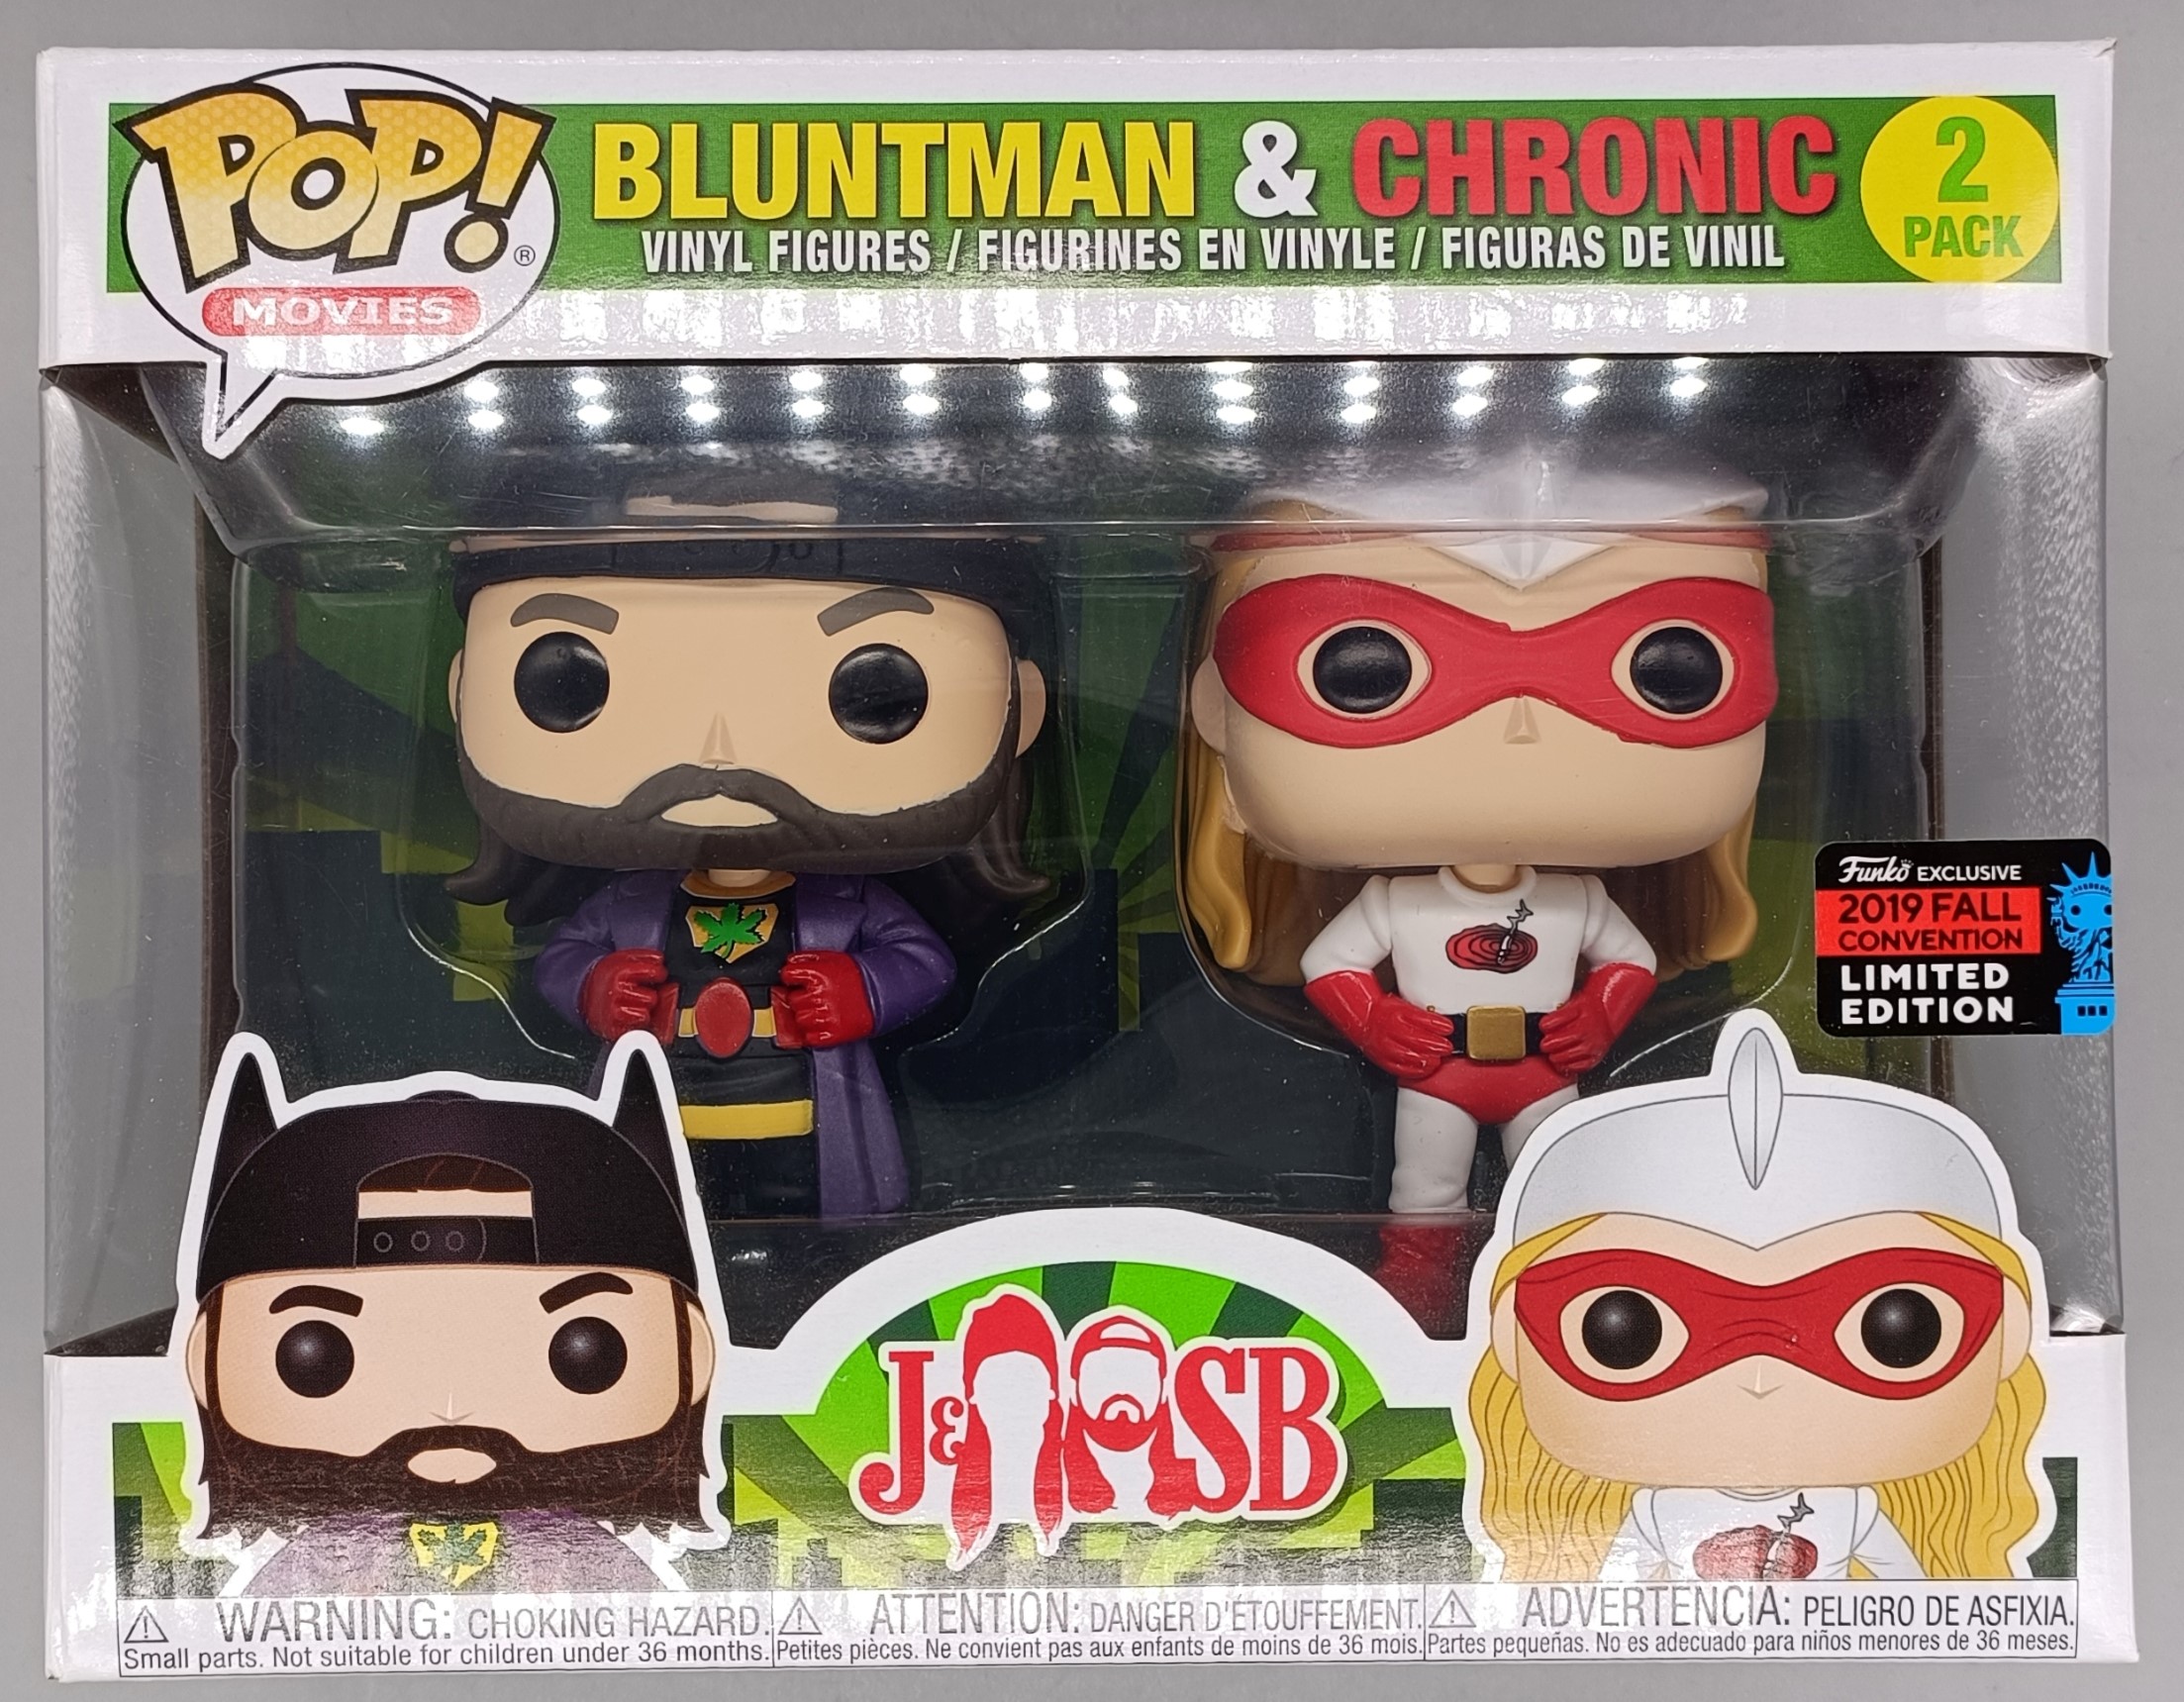 2 Pack] Bluntman and Chronic Jay and Silent Bob Strike Back